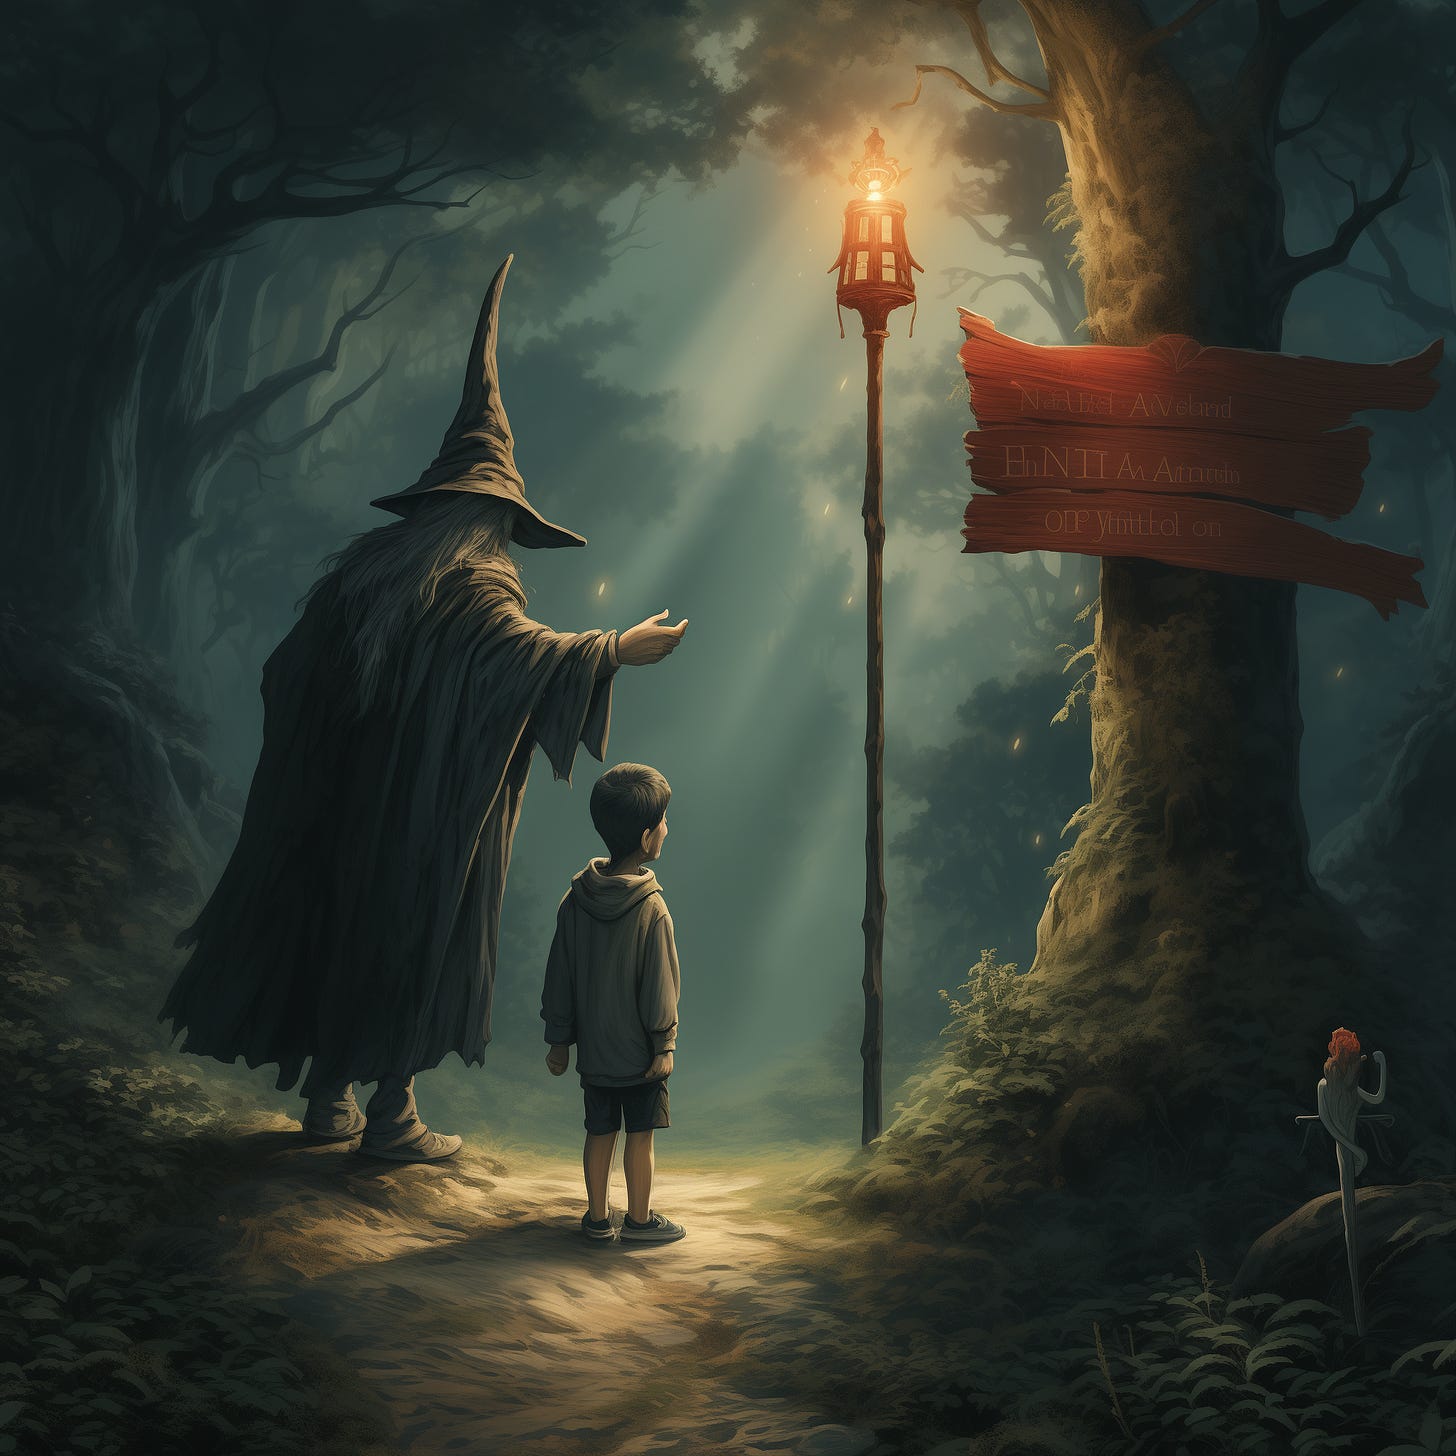 A grey robed wizard with a pointy hat guiding a young boy on a forested cross roads.